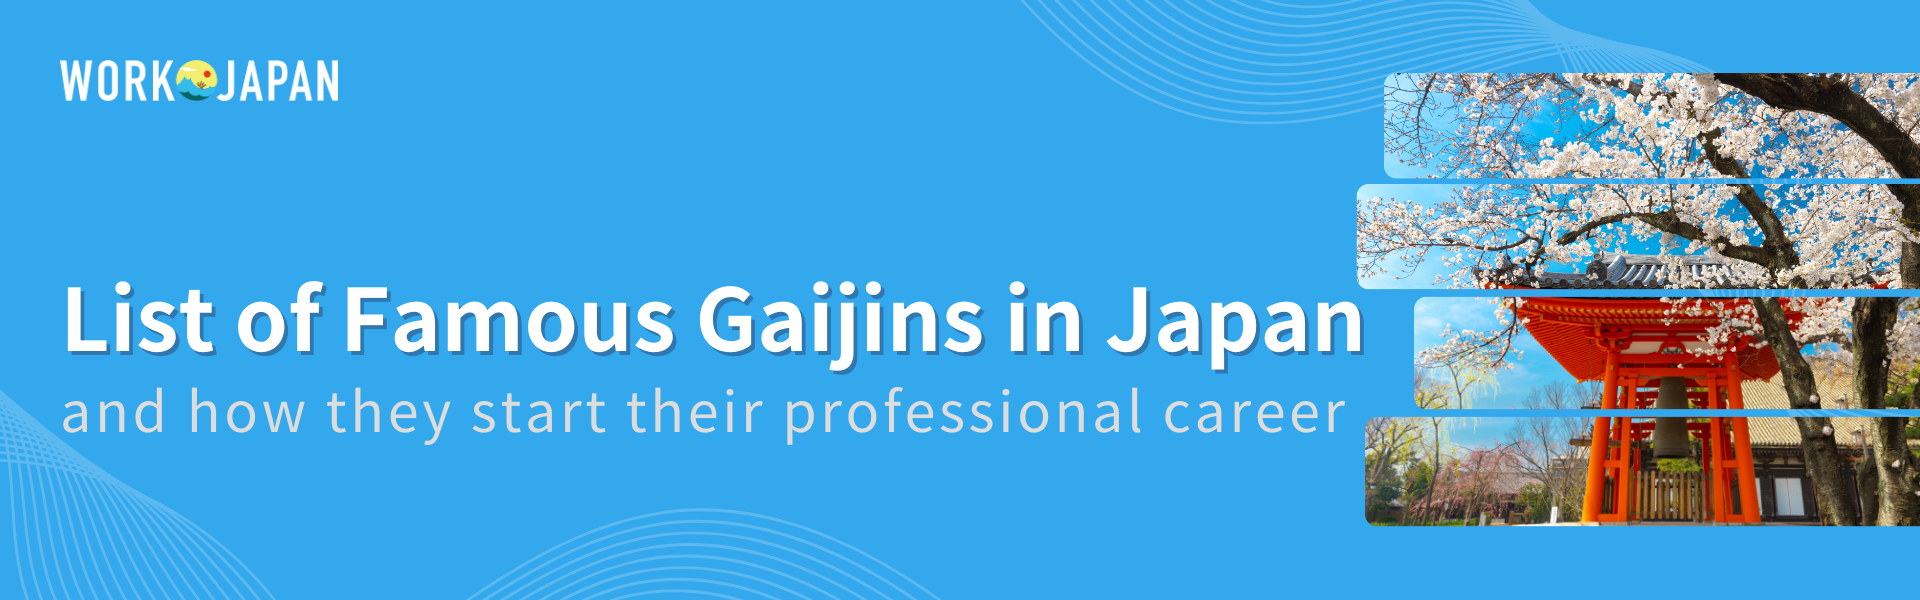 List of Famous Gaijins in Japan and how they start their professional career